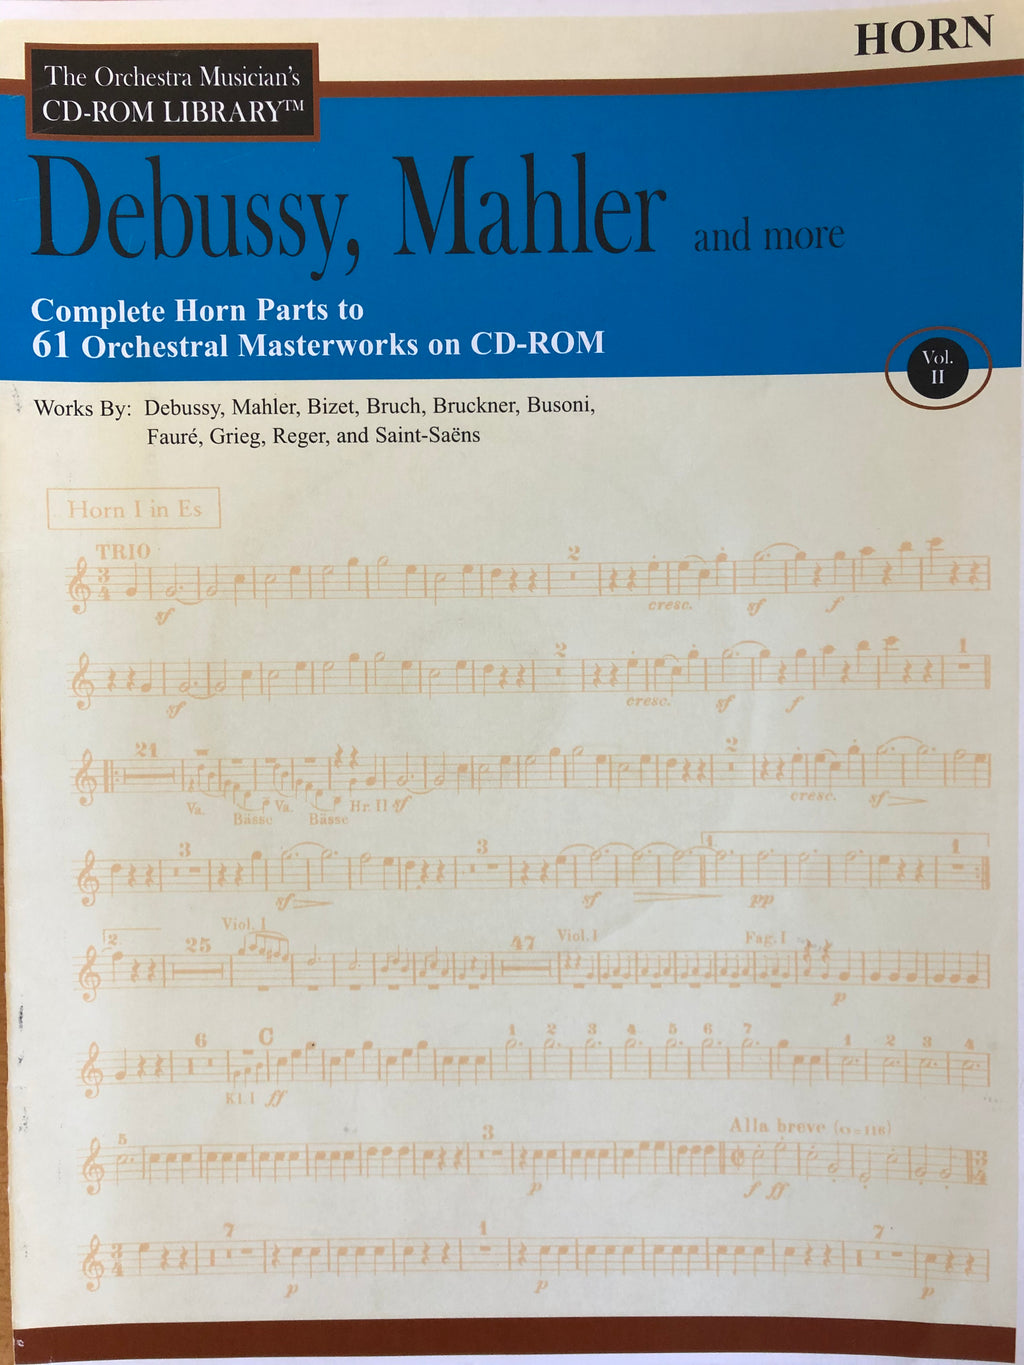 Debussy, Mahler and More: The Orchestra Musician's CD-ROM Library, Vol. II - Scattando Verkleedhuis